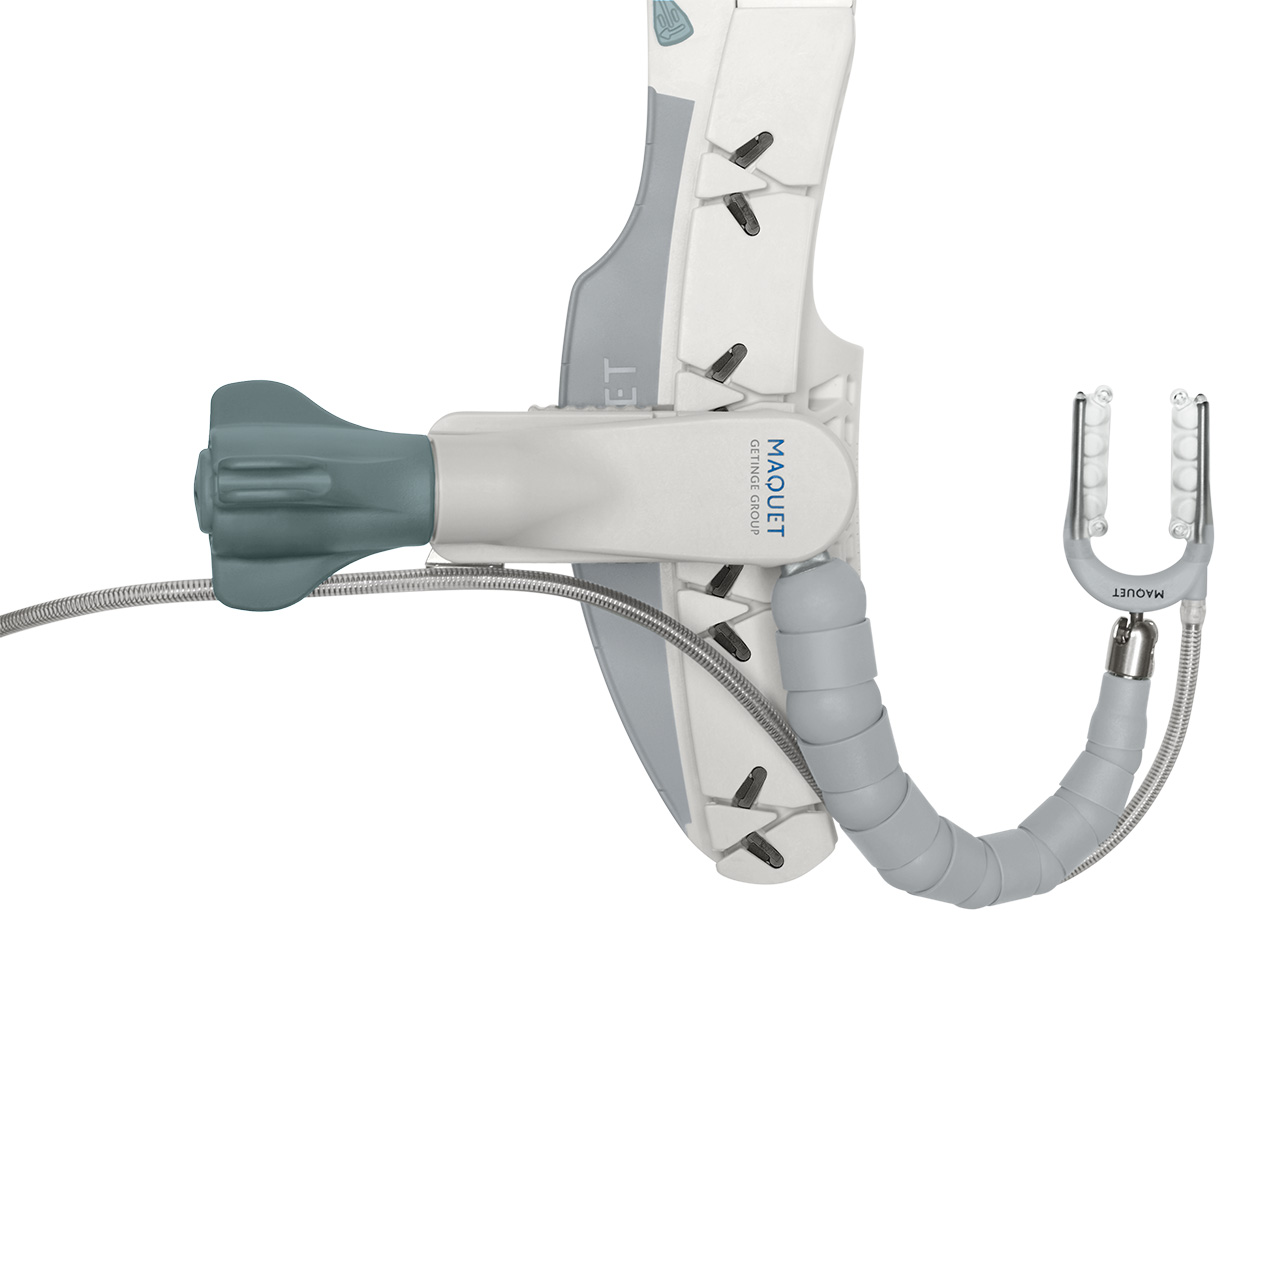 Acrobat-i Stabilizer helps surgeons gain better access and control for hard to reach vessels during coronary artergy bypass surgery CABG